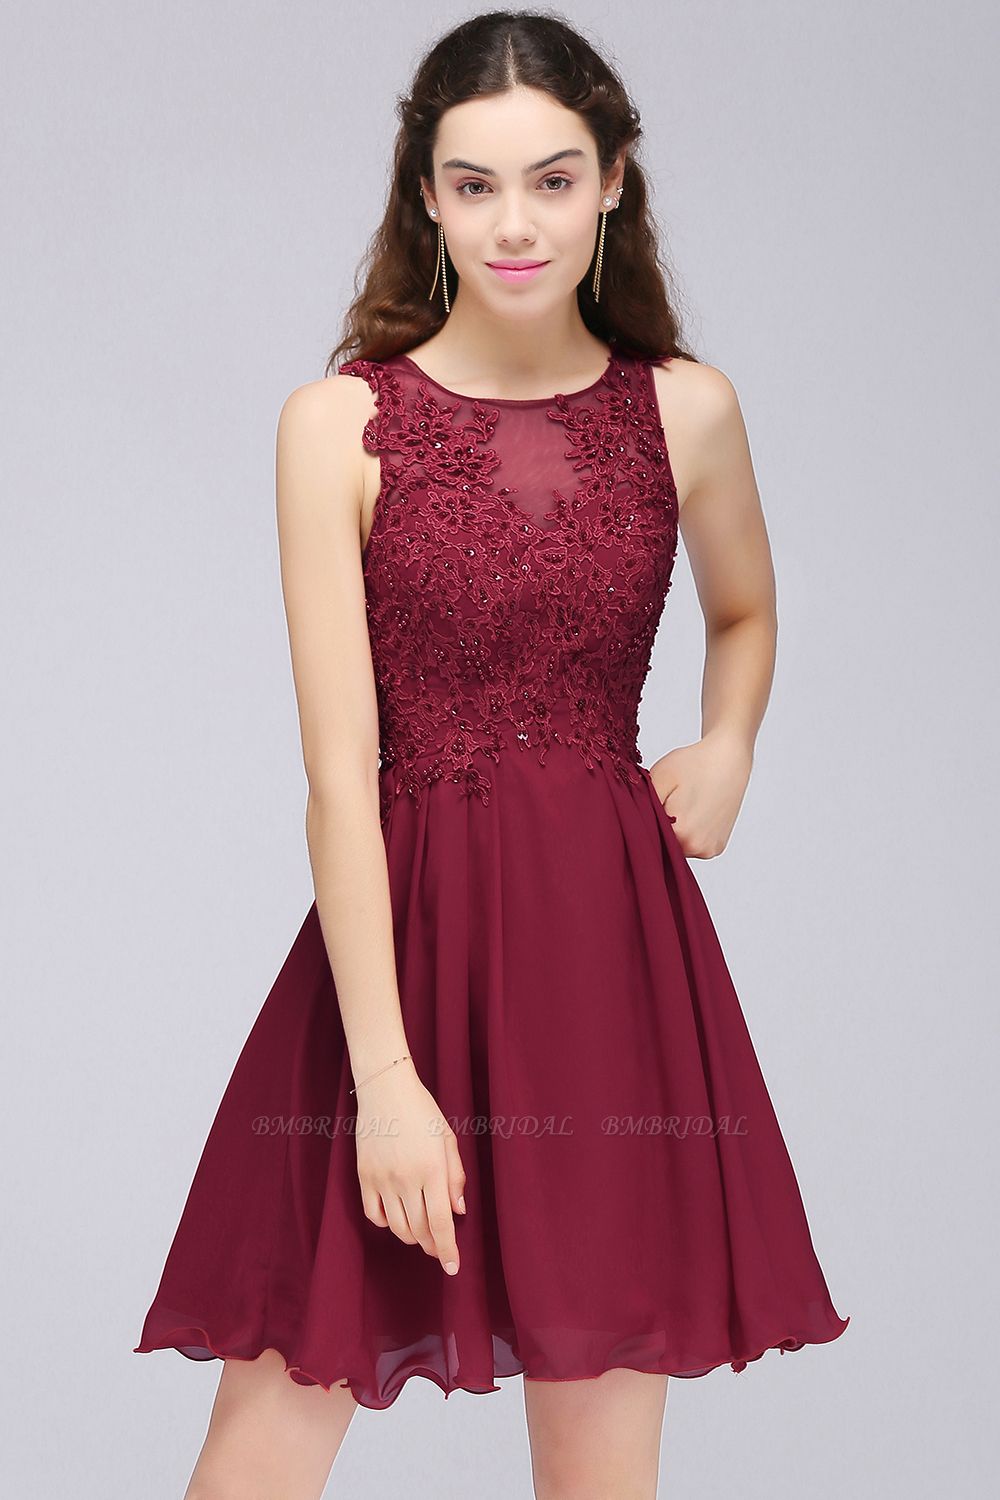 BMbridal Lovely Lace Short Burgundy Bridesmaid Dress with Appliques